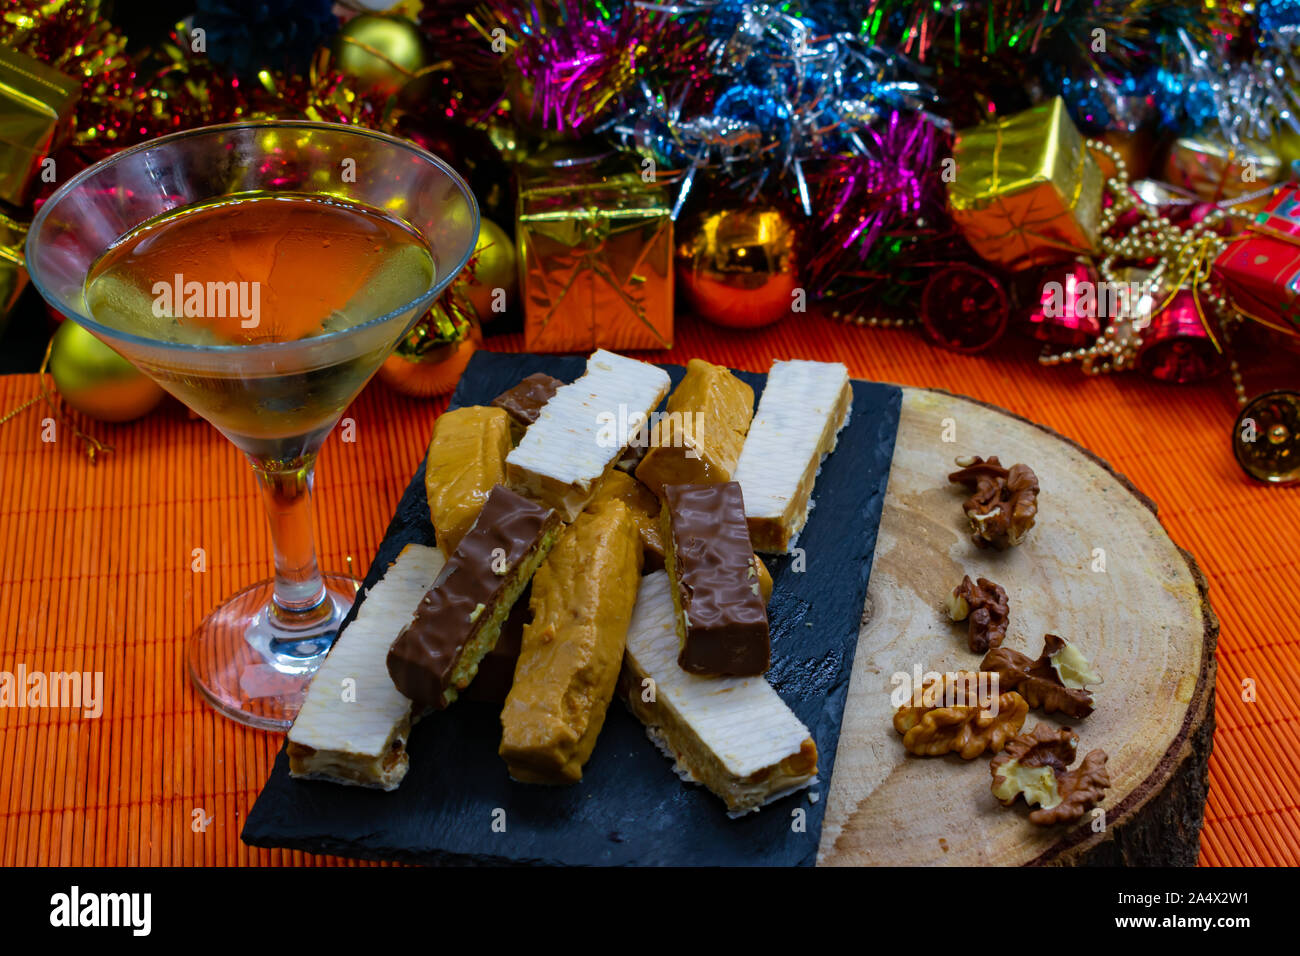 Christmas still lifes and typical foods of these holidays Stock Photo